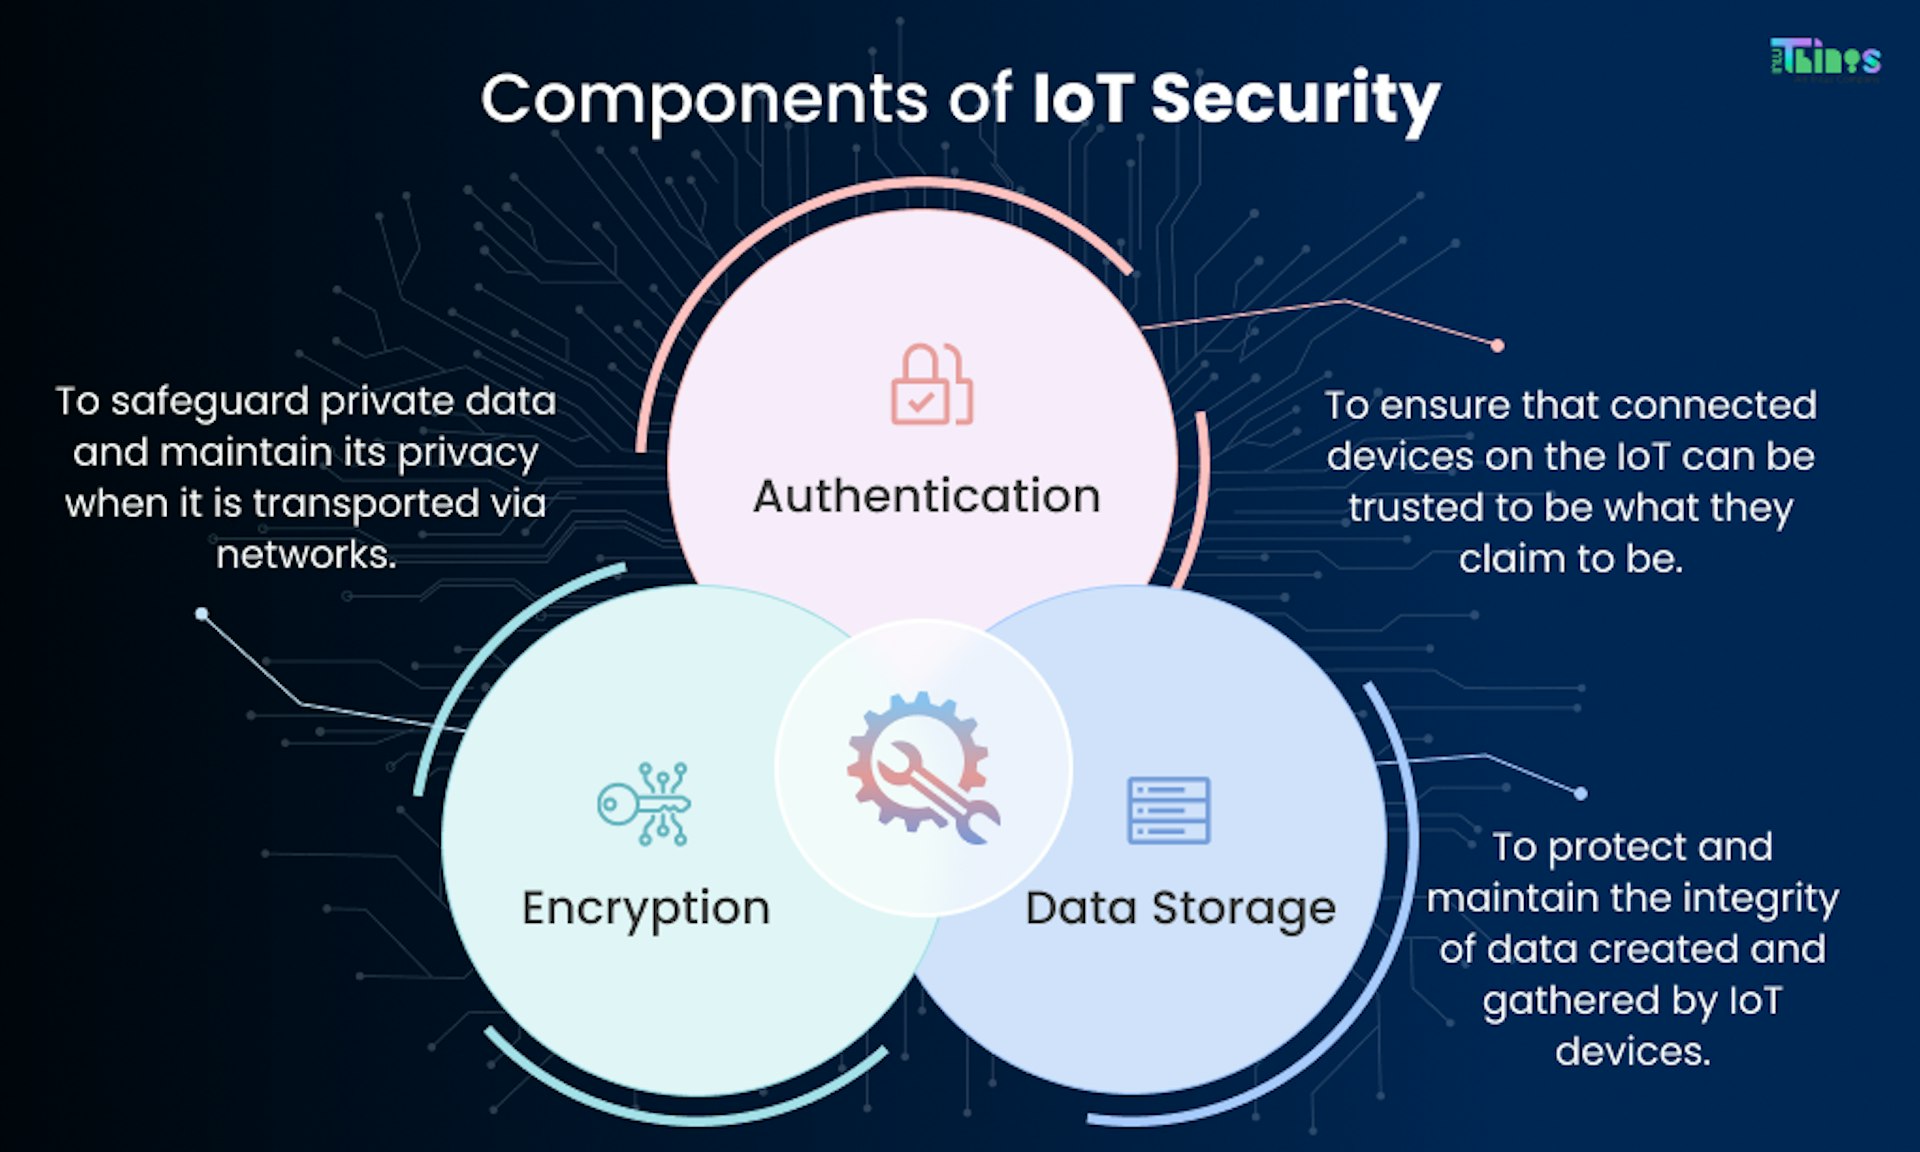 Components of IoT Security-Encryption, Authentication, Data Storage